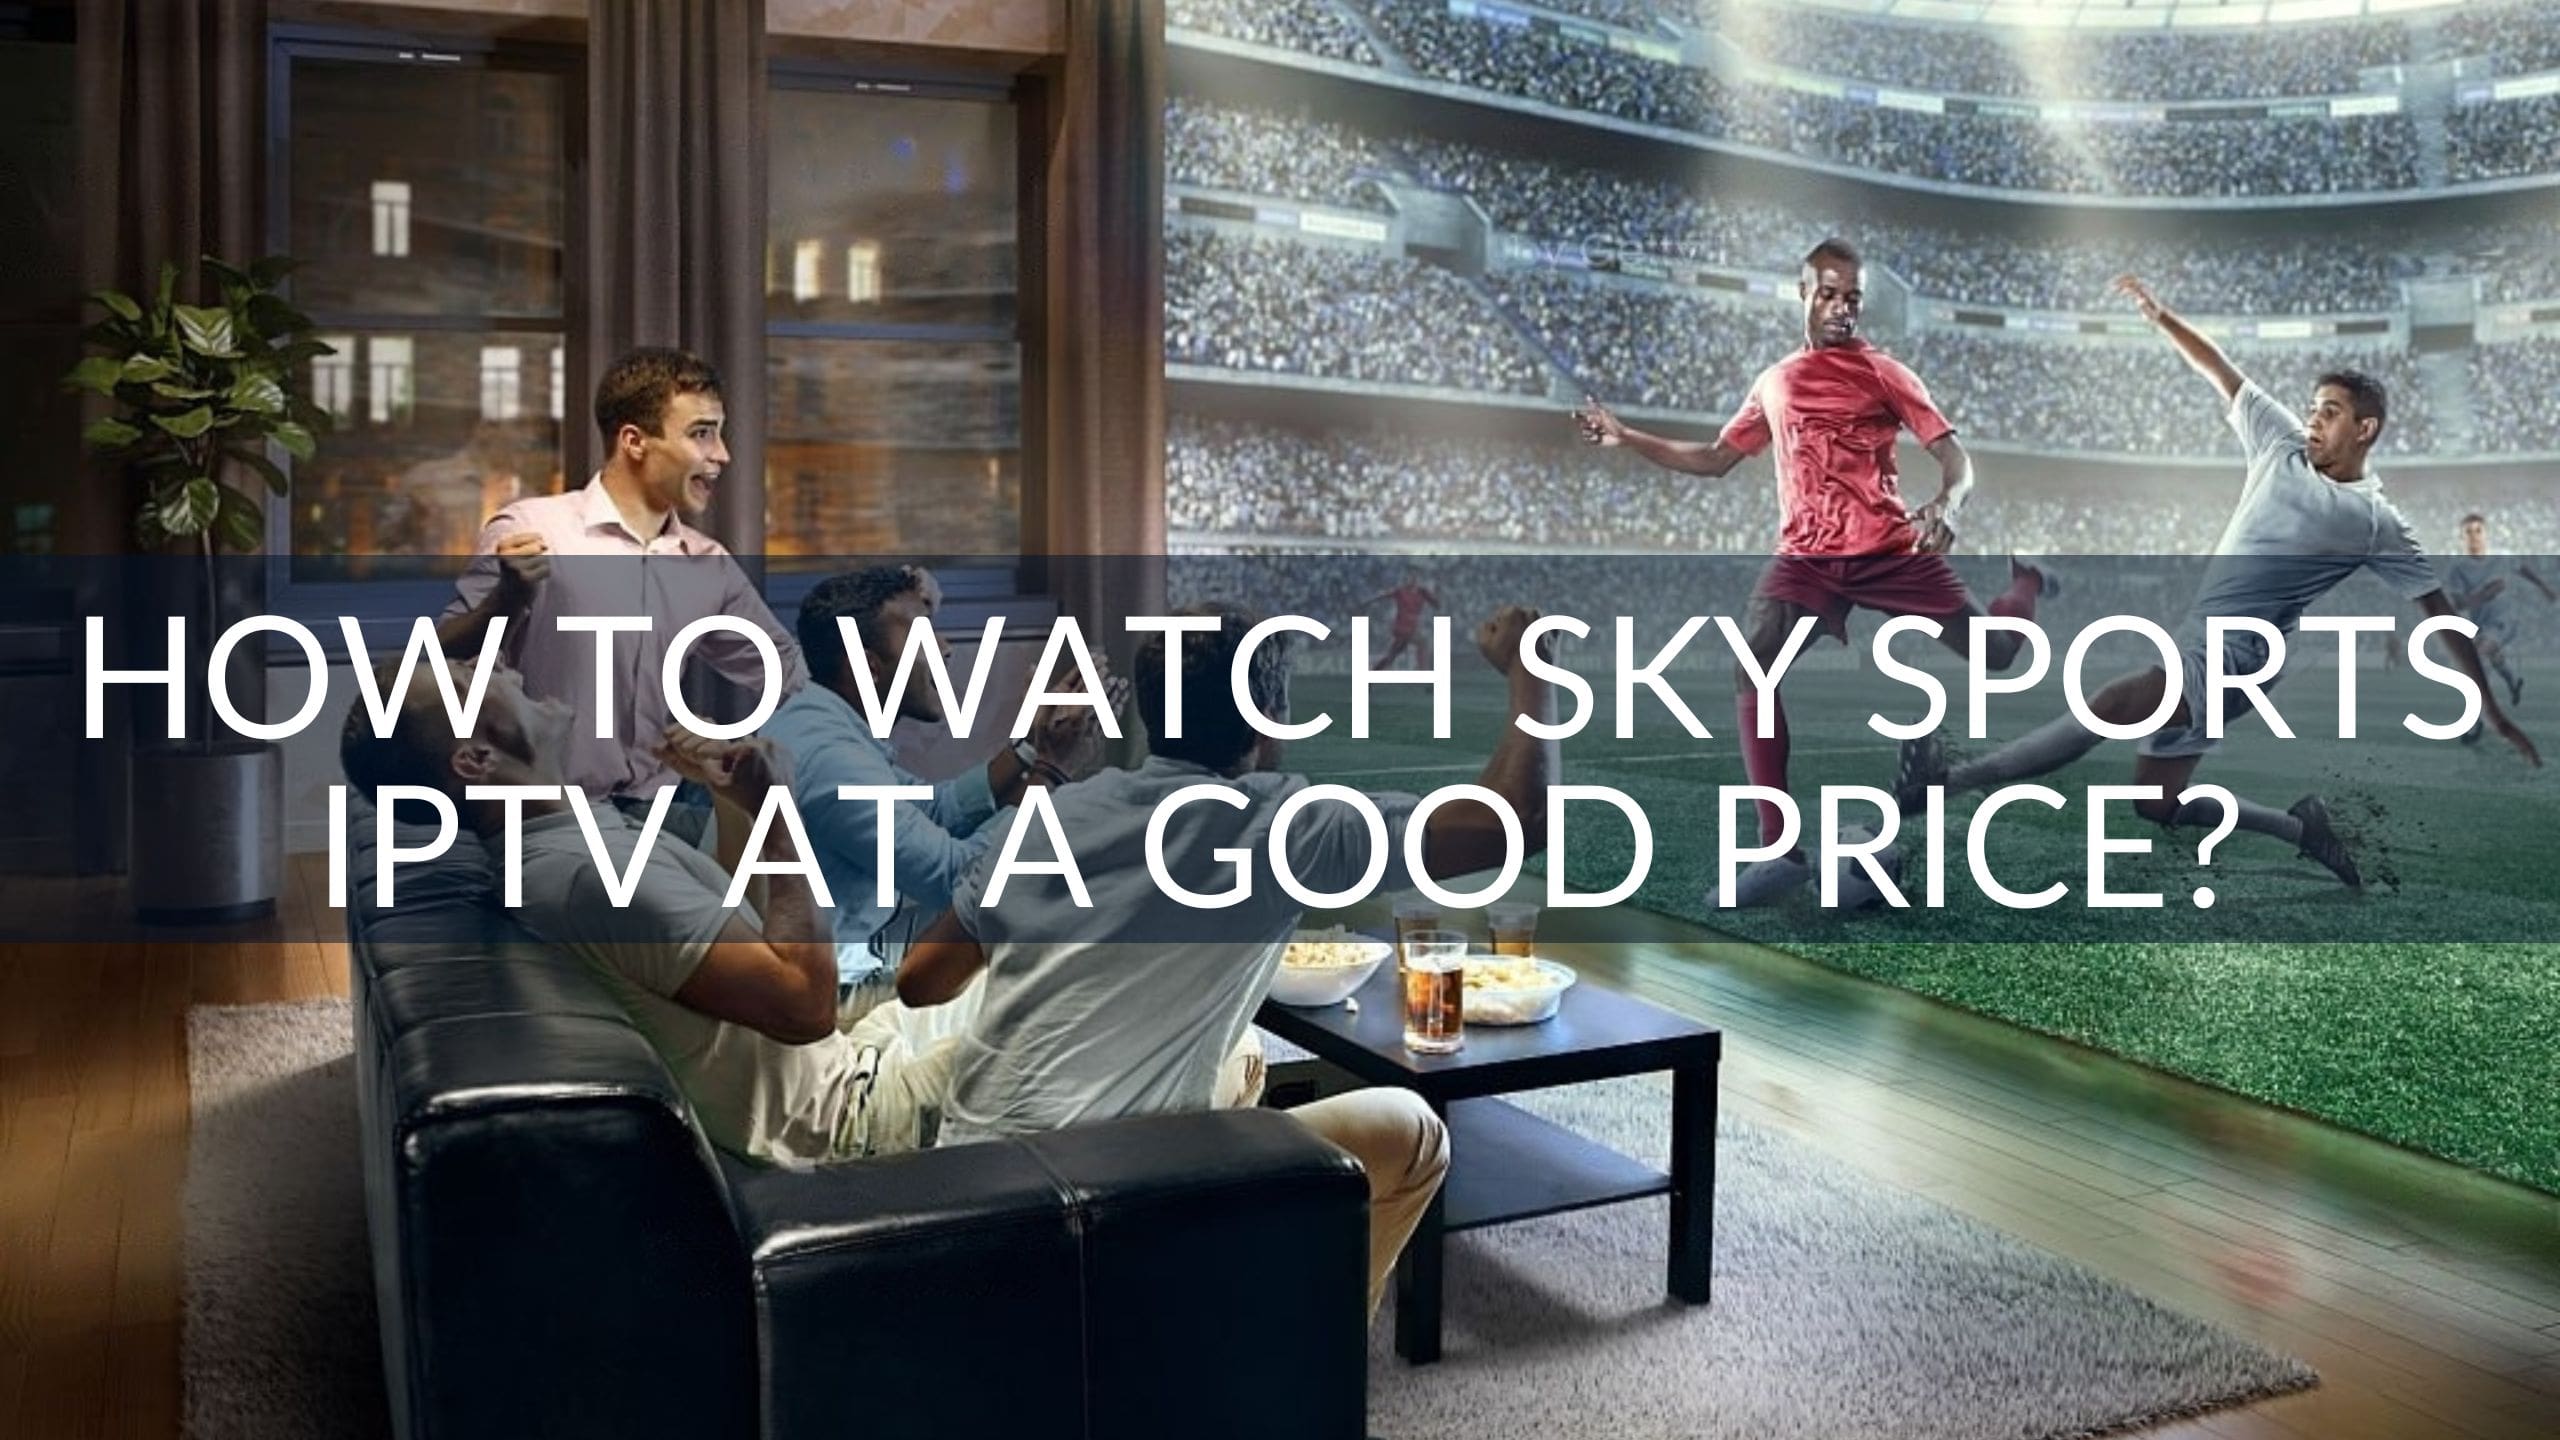 How to Watch Sky Sports IPTV at a Good Price?